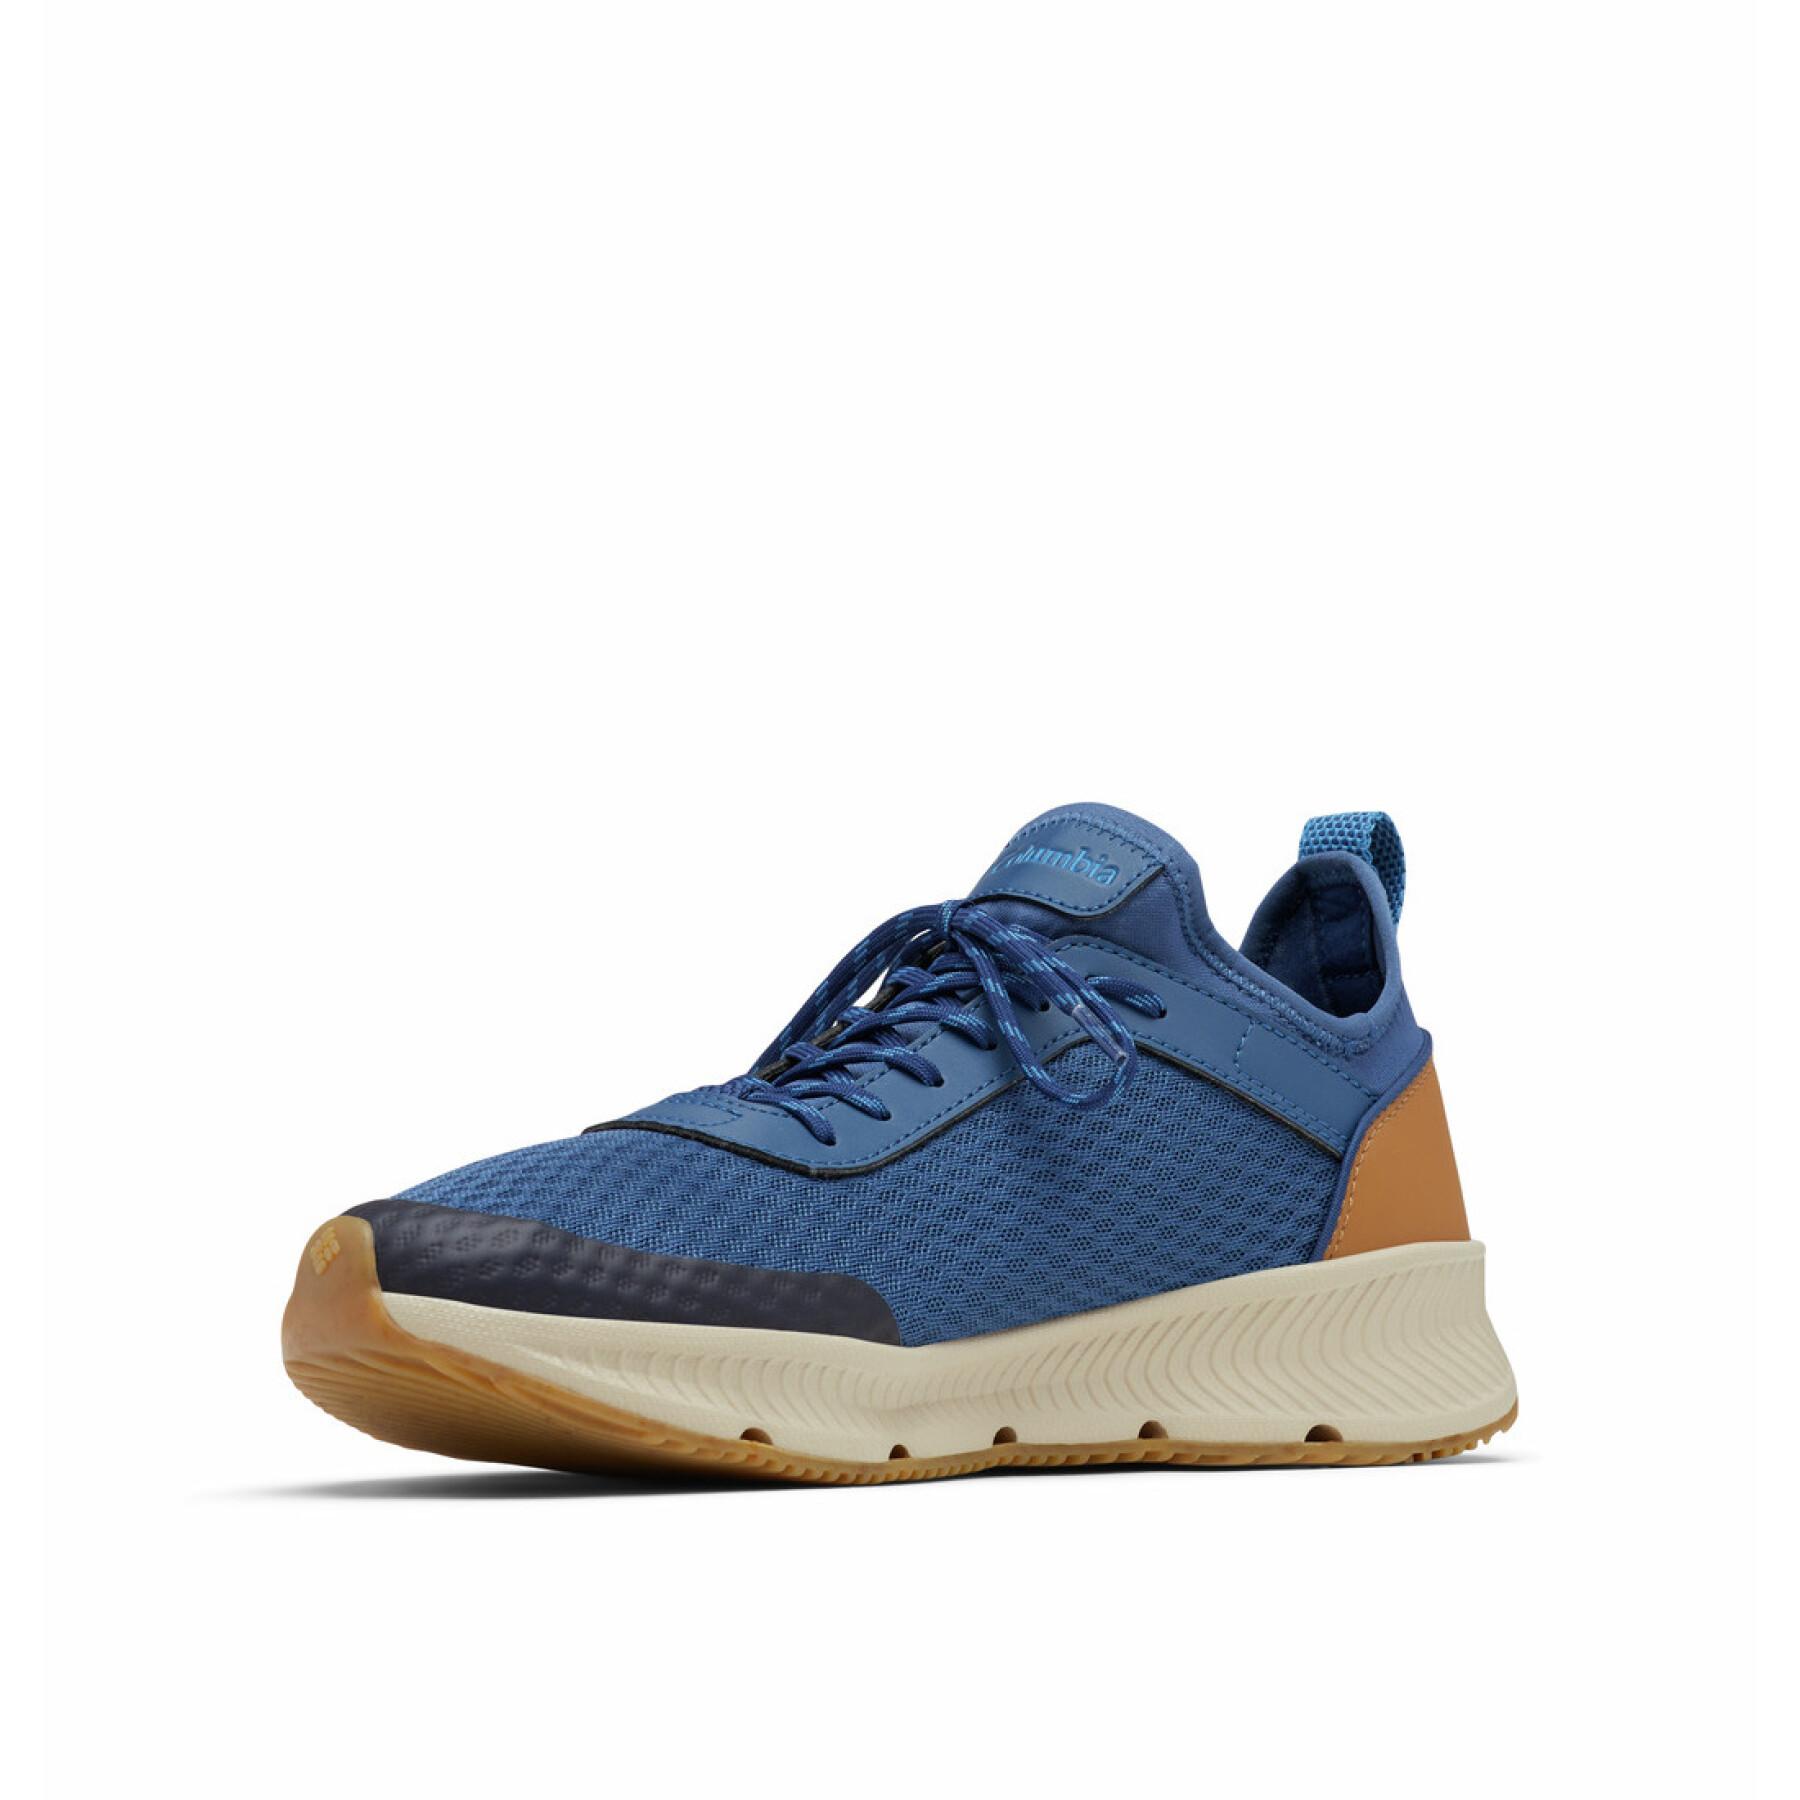 Chaussures Columbia Summertide